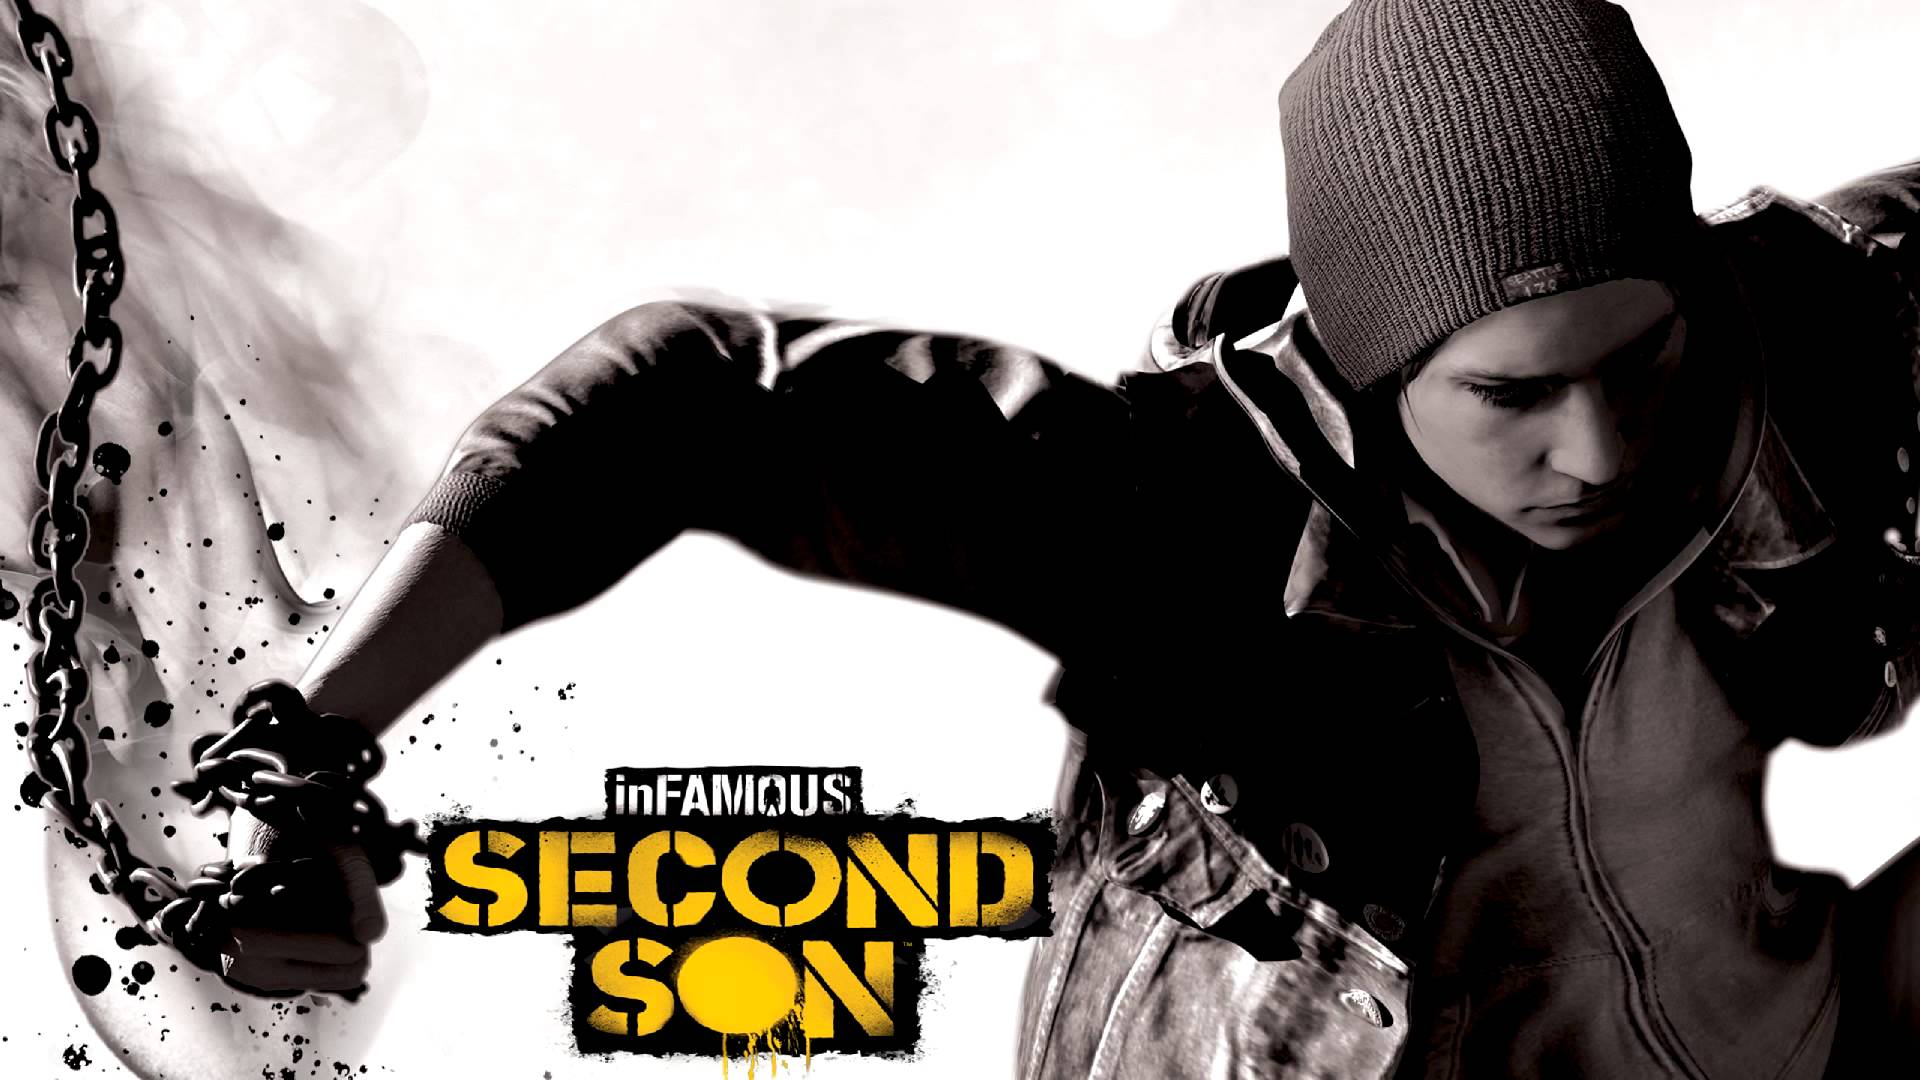 [Rumor] inFamous: Second Son and Child of Light for PS Plus in September